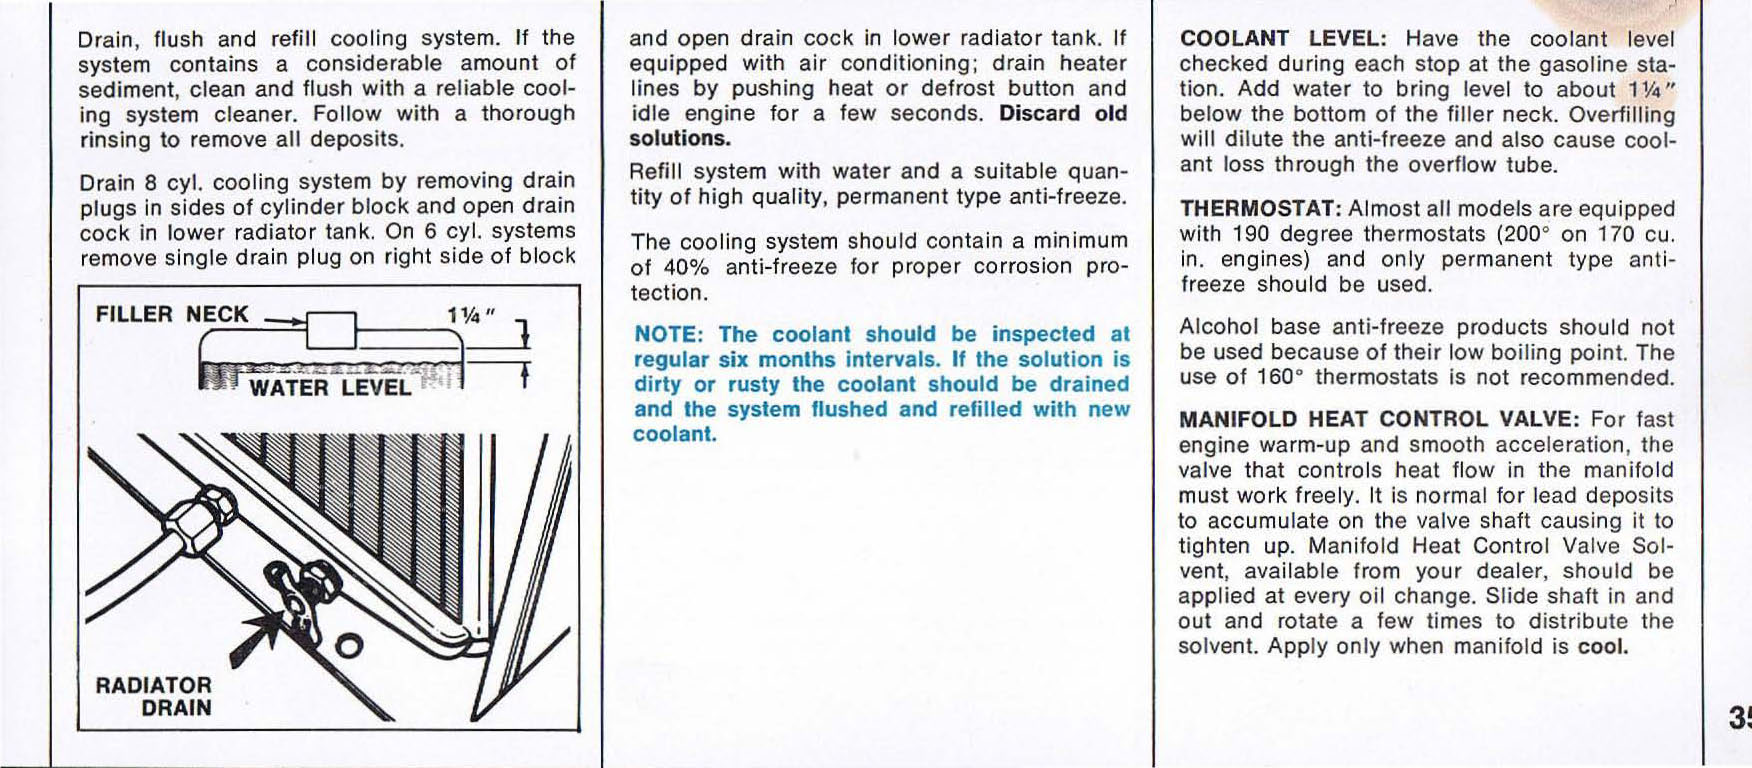 1969_Plymouth_Valiant_Owners_Manual-35